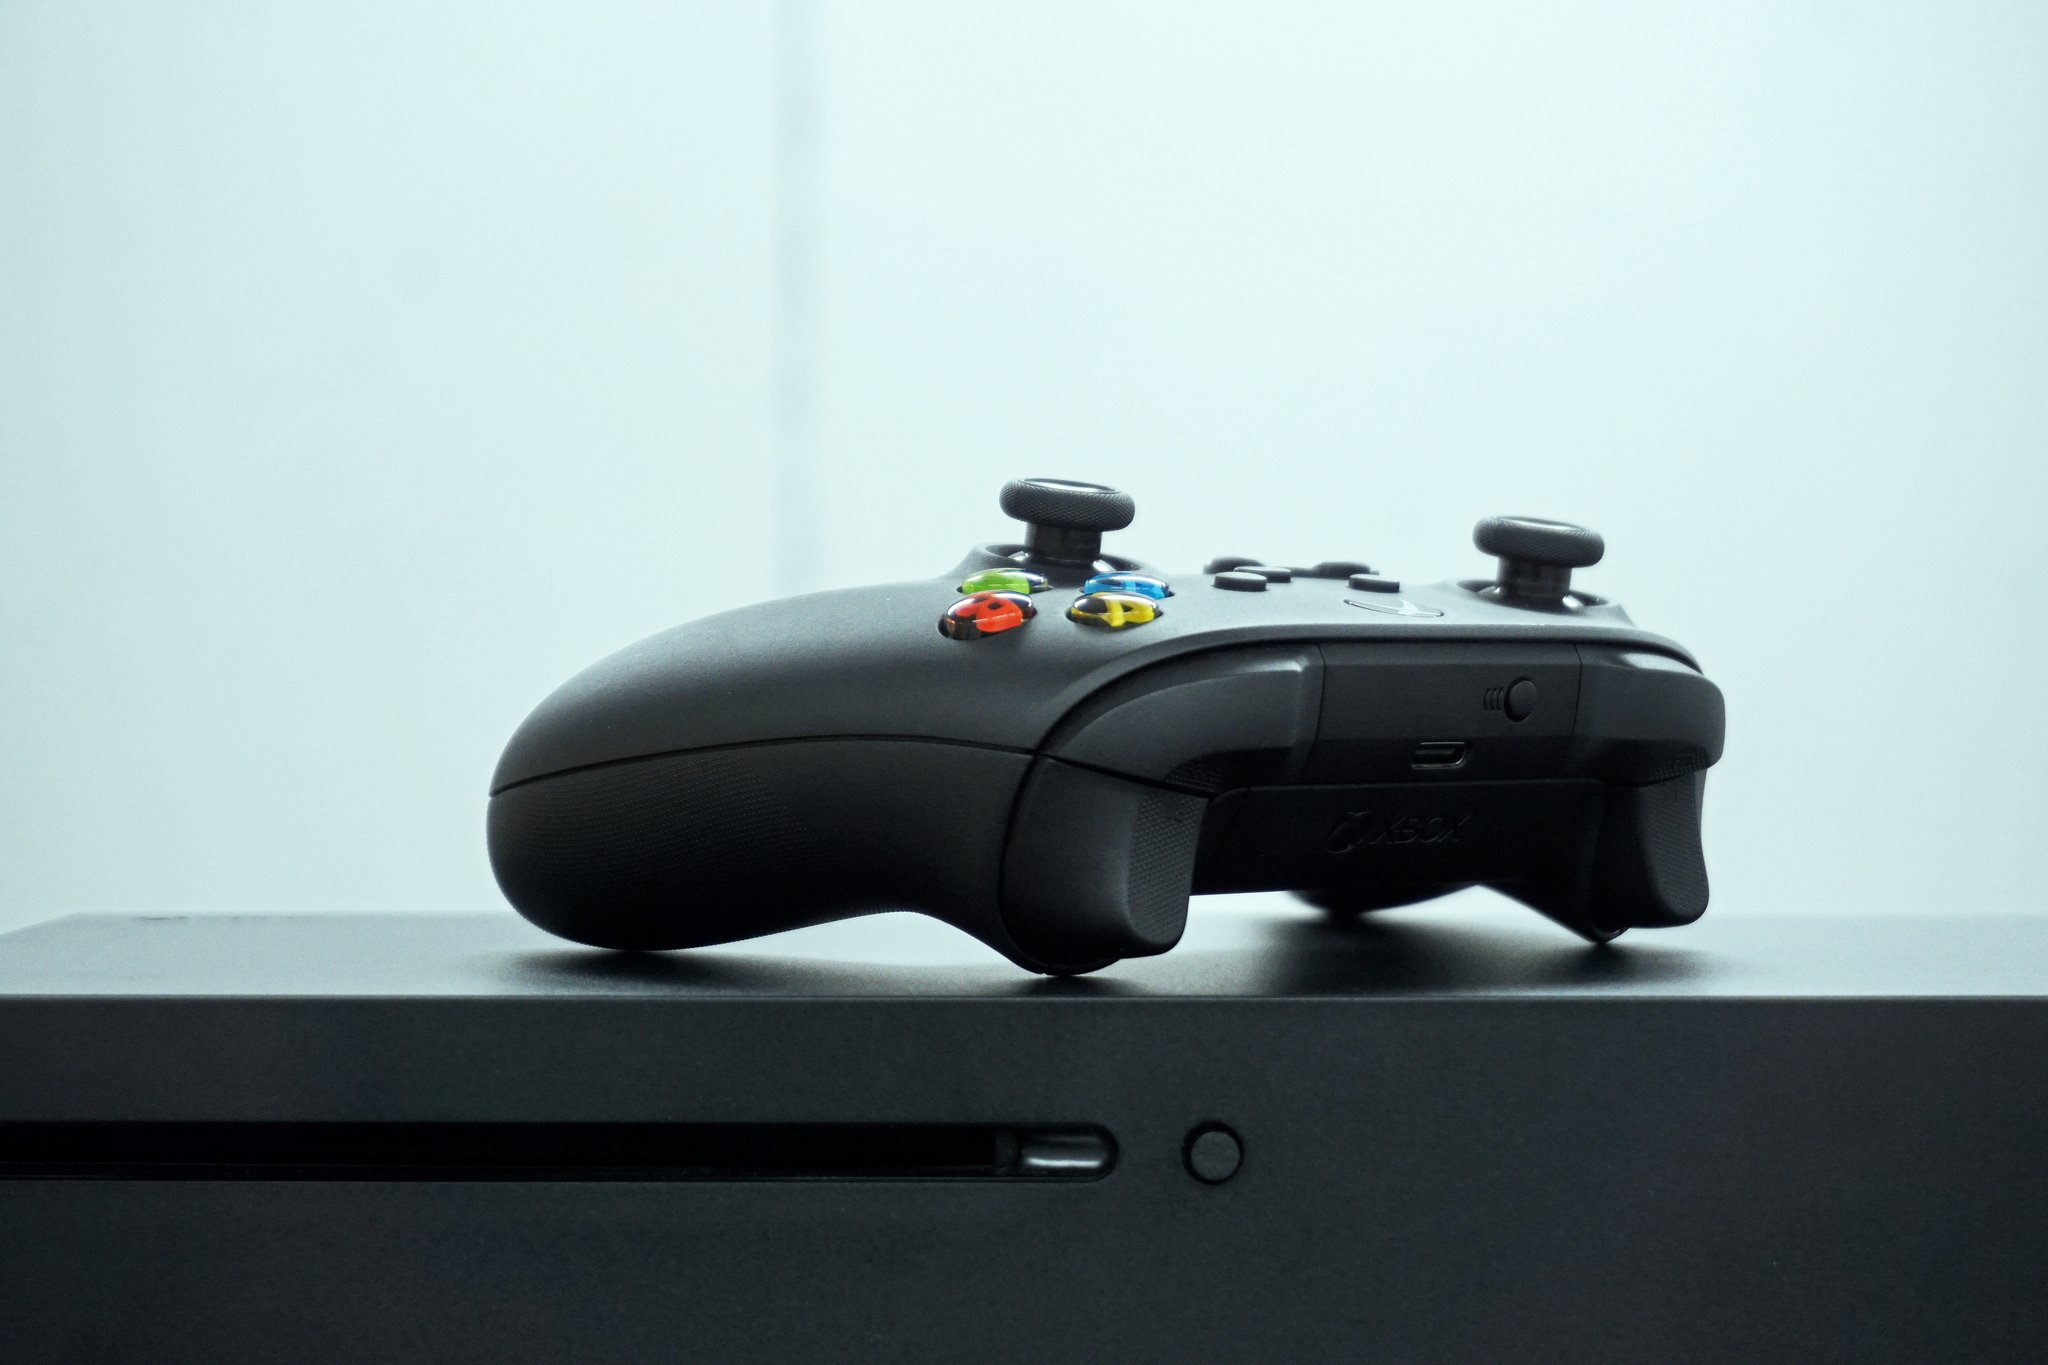 Here's our first look at Microsoft's flagship console, Xbox Series